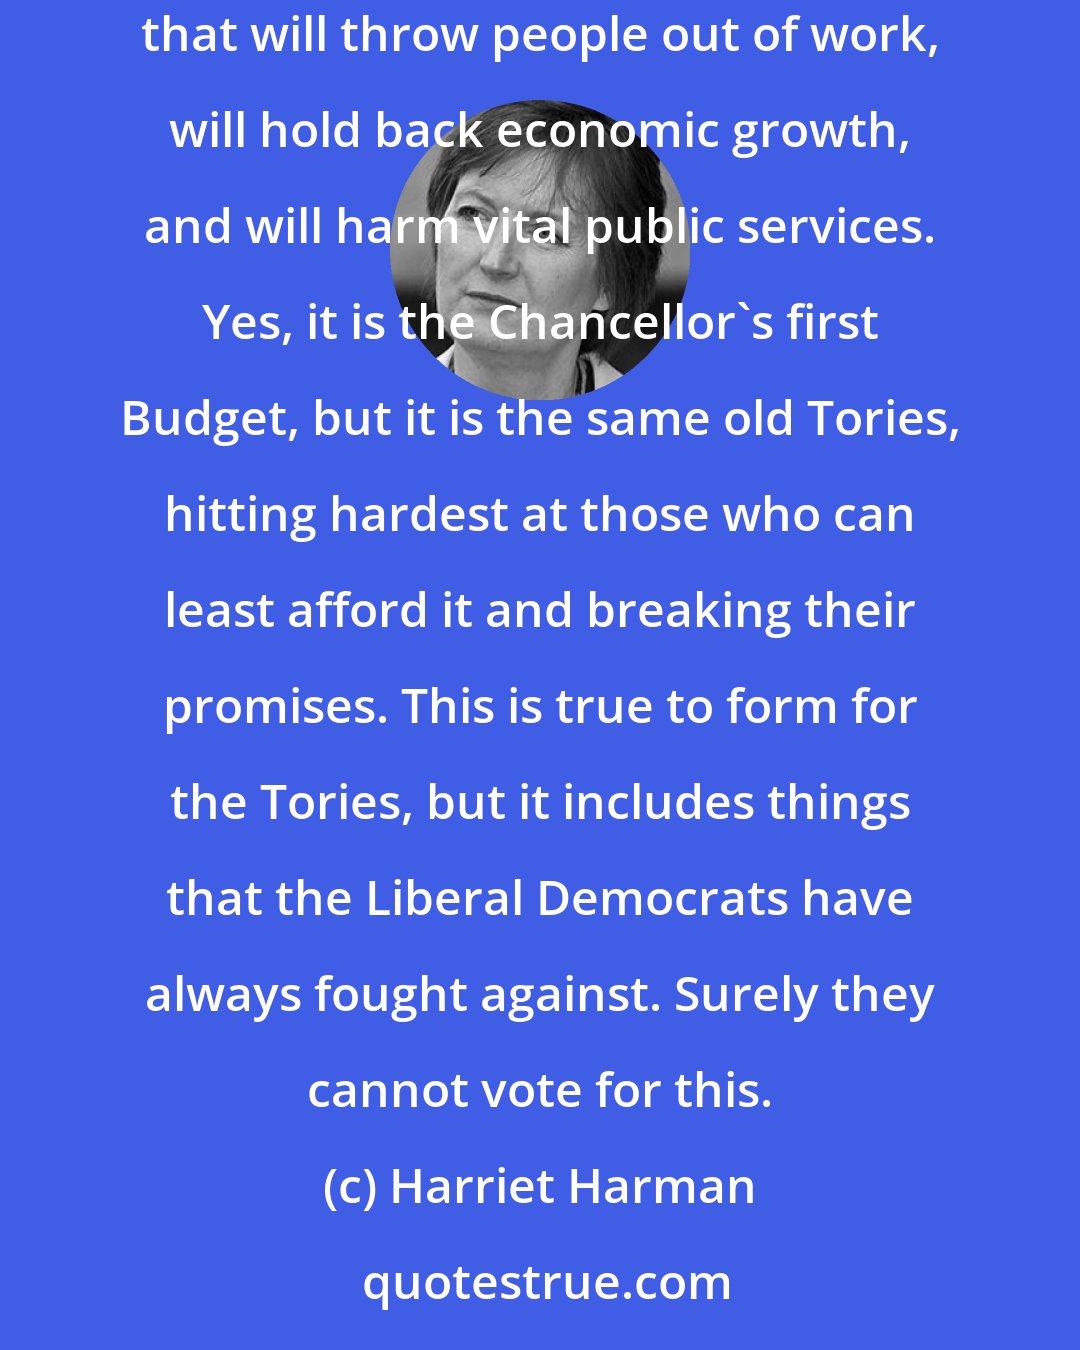 Harriet Harman: The Chancellor of the Exchequer has delivered his Budget. It is his first Budget, but we have seen it all before. This is a Tory Budget that will throw people out of work, will hold back economic growth, and will harm vital public services. Yes, it is the Chancellor's first Budget, but it is the same old Tories, hitting hardest at those who can least afford it and breaking their promises. This is true to form for the Tories, but it includes things that the Liberal Democrats have always fought against. Surely they cannot vote for this.